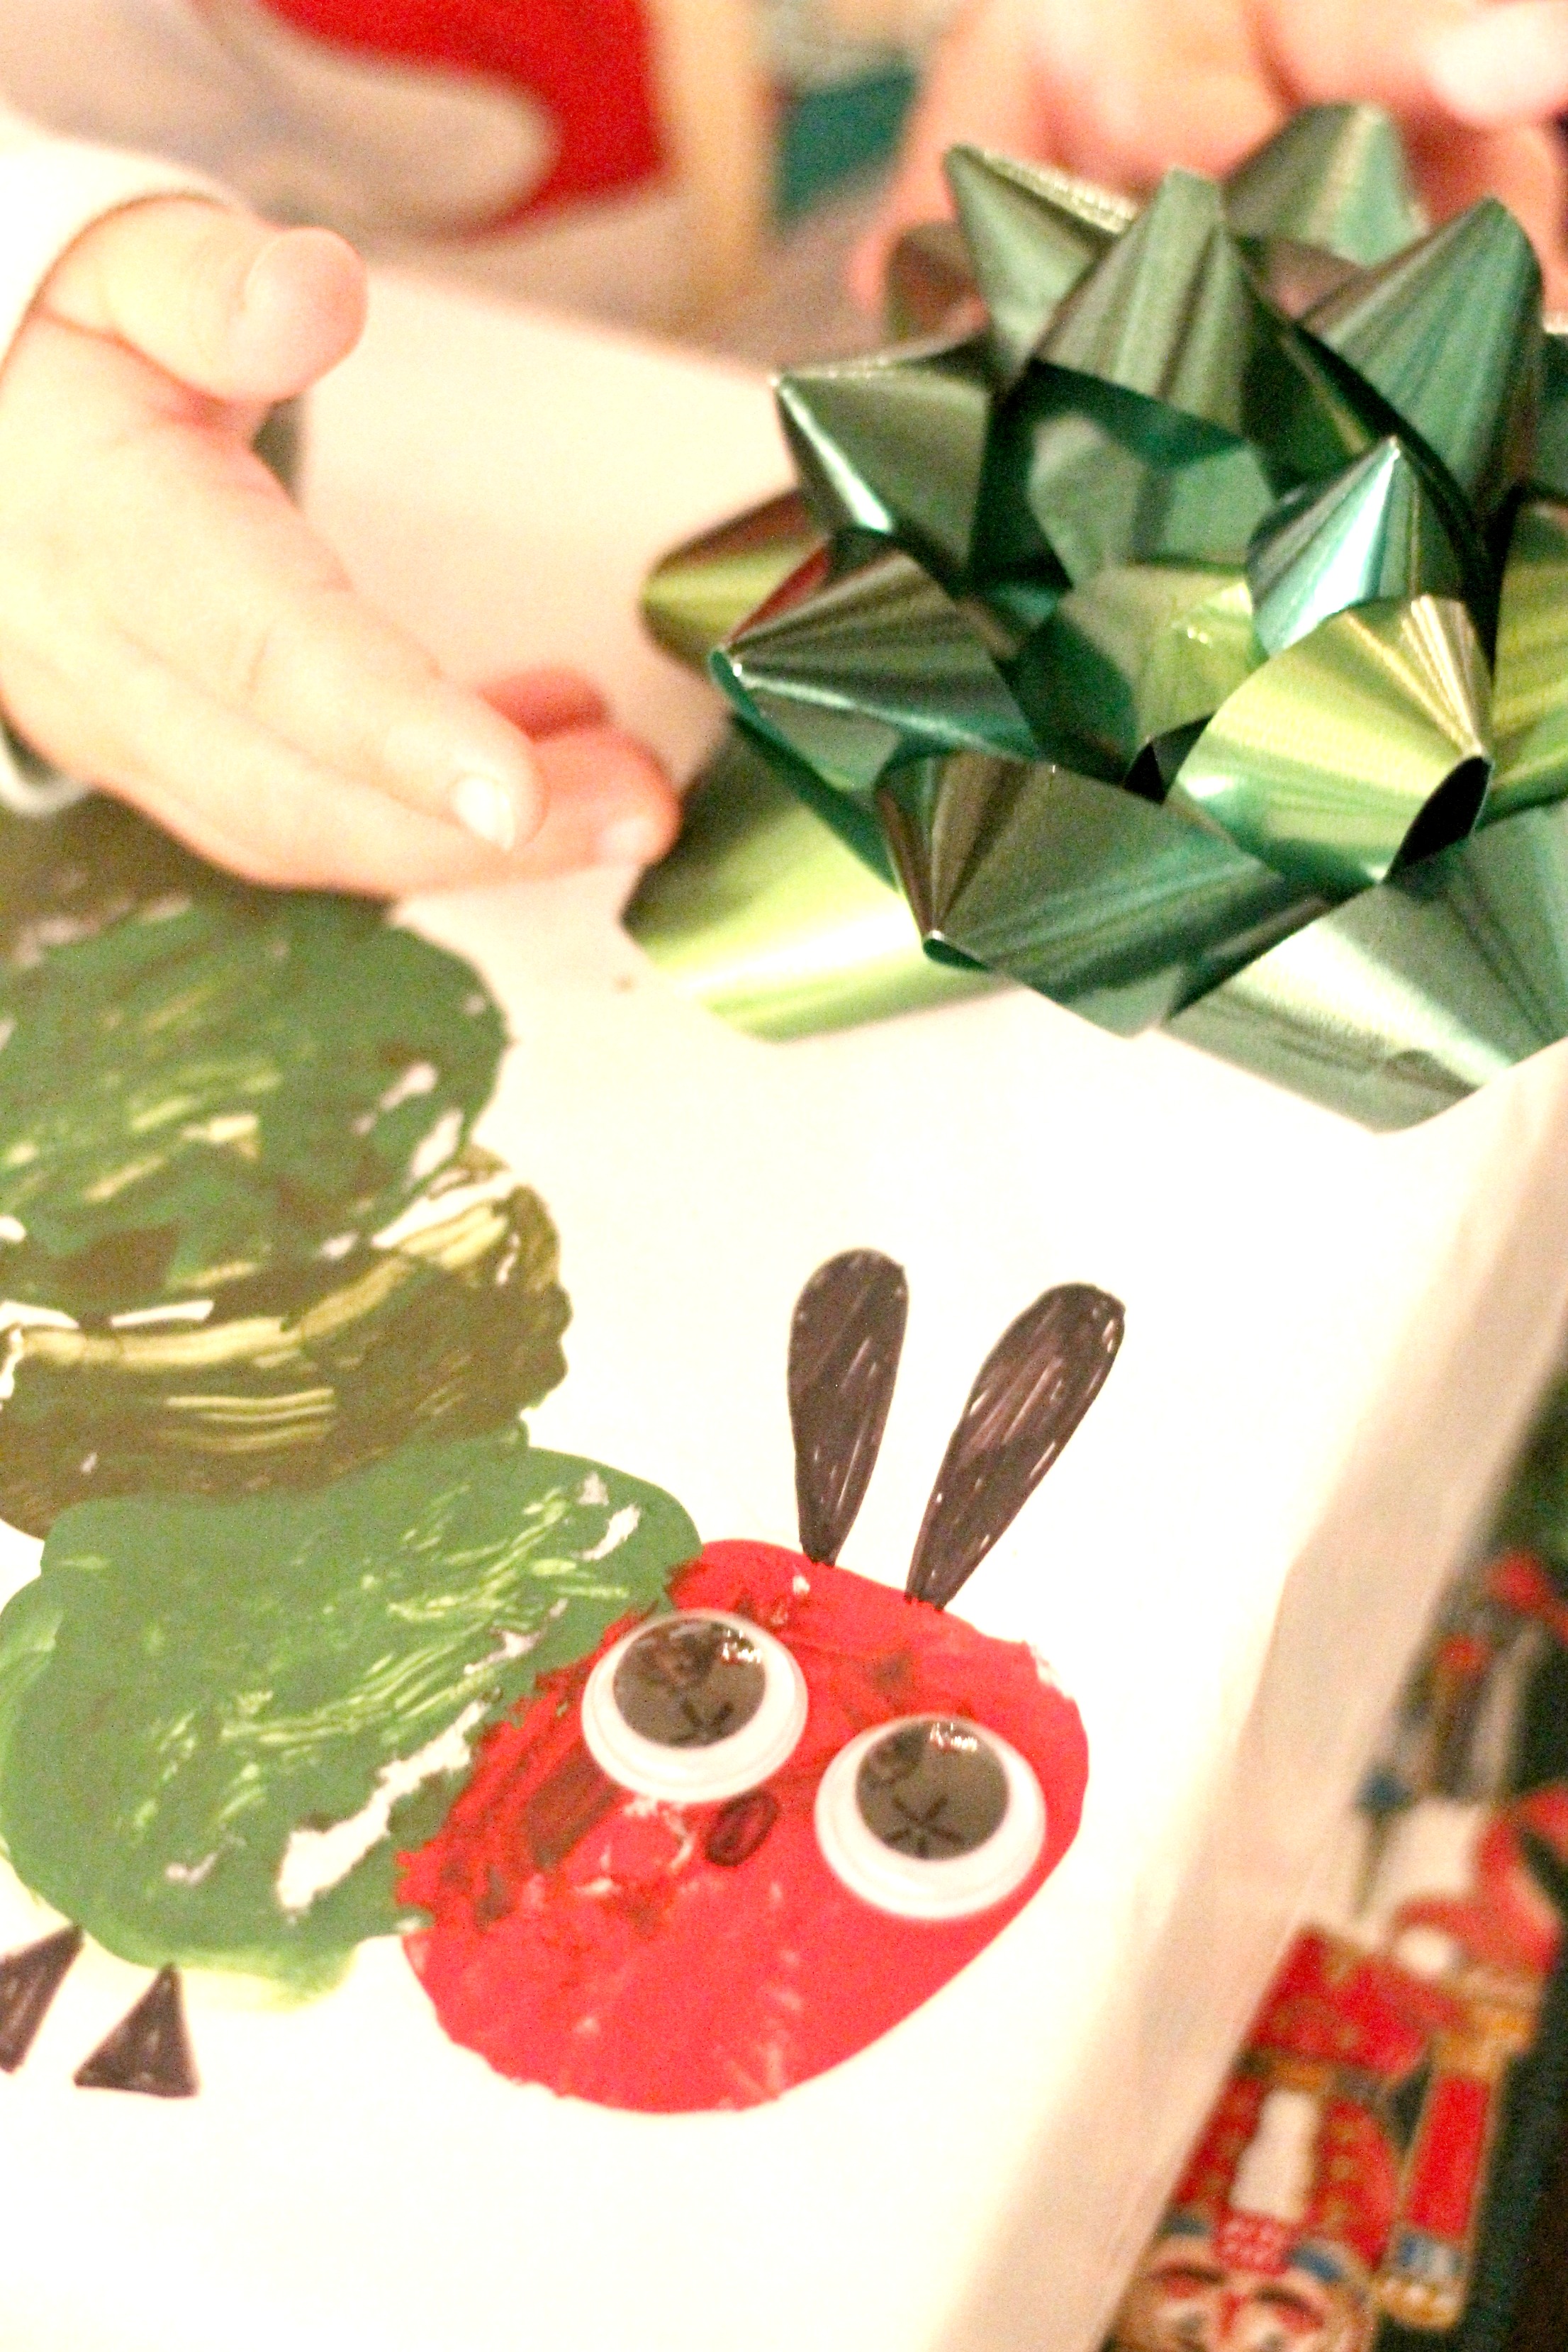 Does your child love the fun illustrations by Eric Carle? Look at all these gift ideas from the world of Eric Carle.